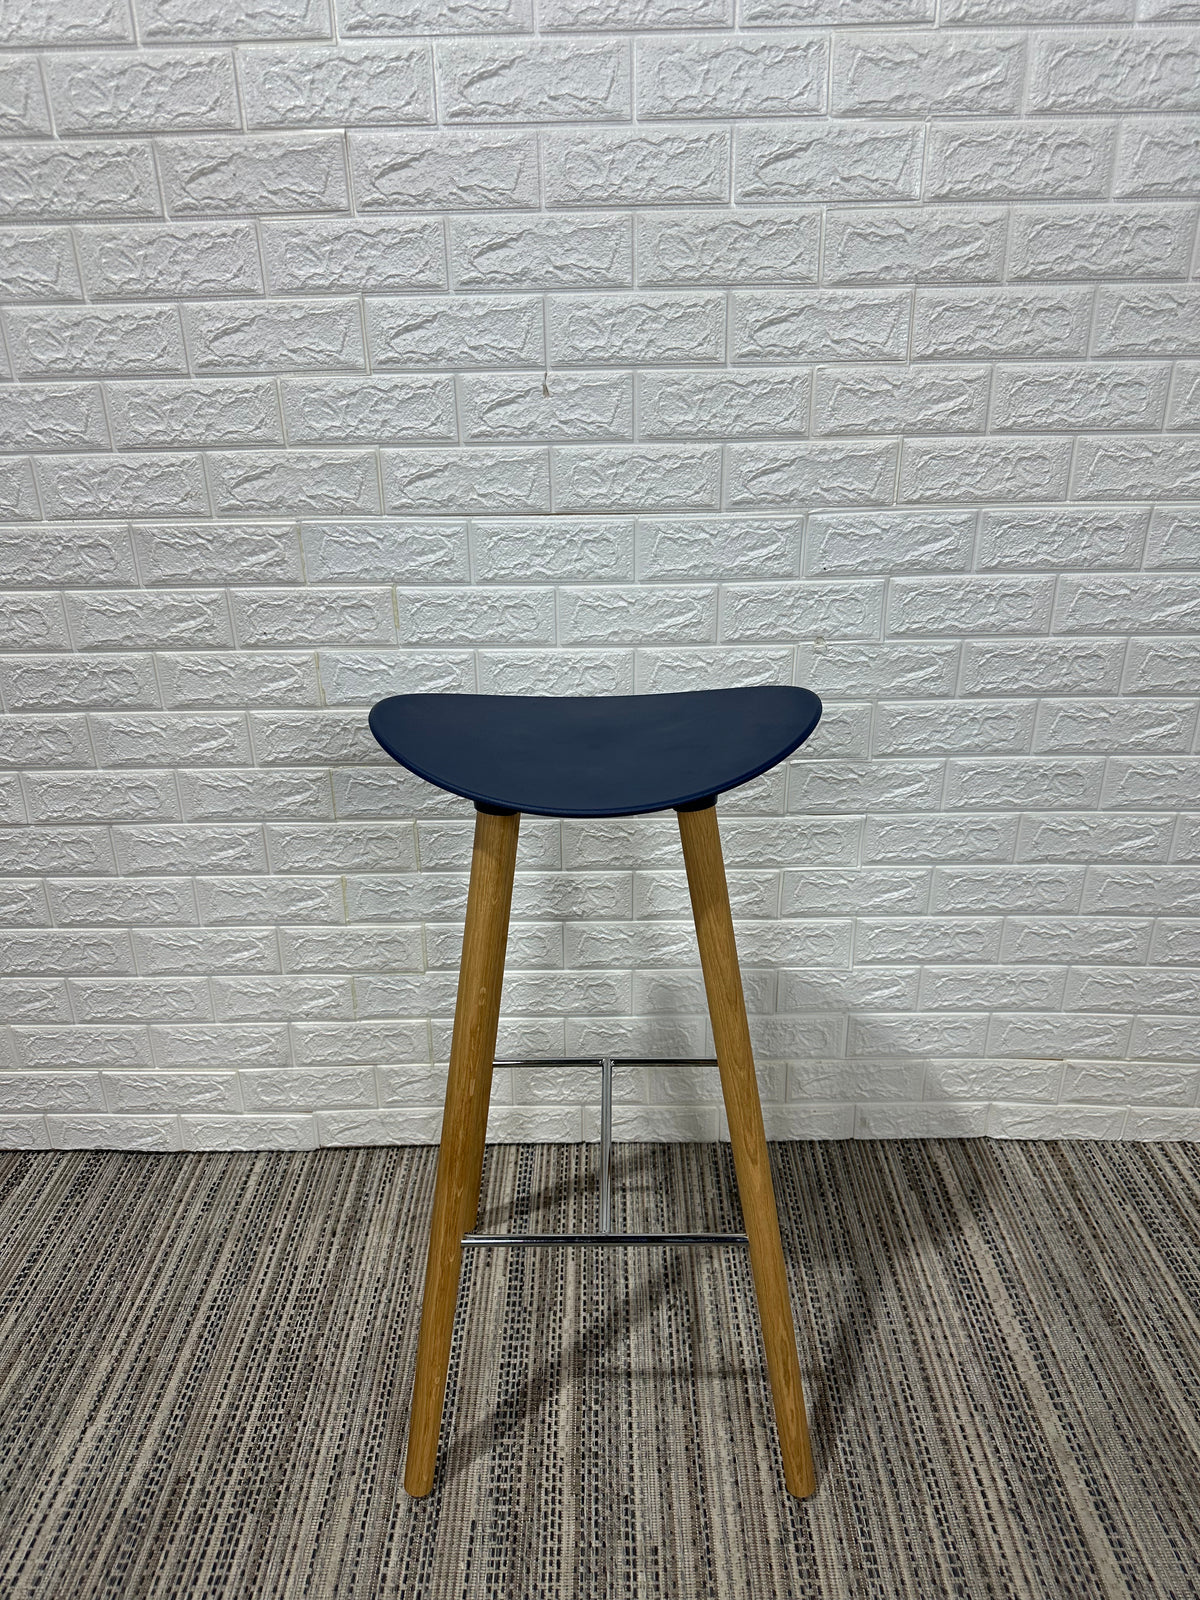 Pre-Owned Blue Stool - Duckys Office Furniture